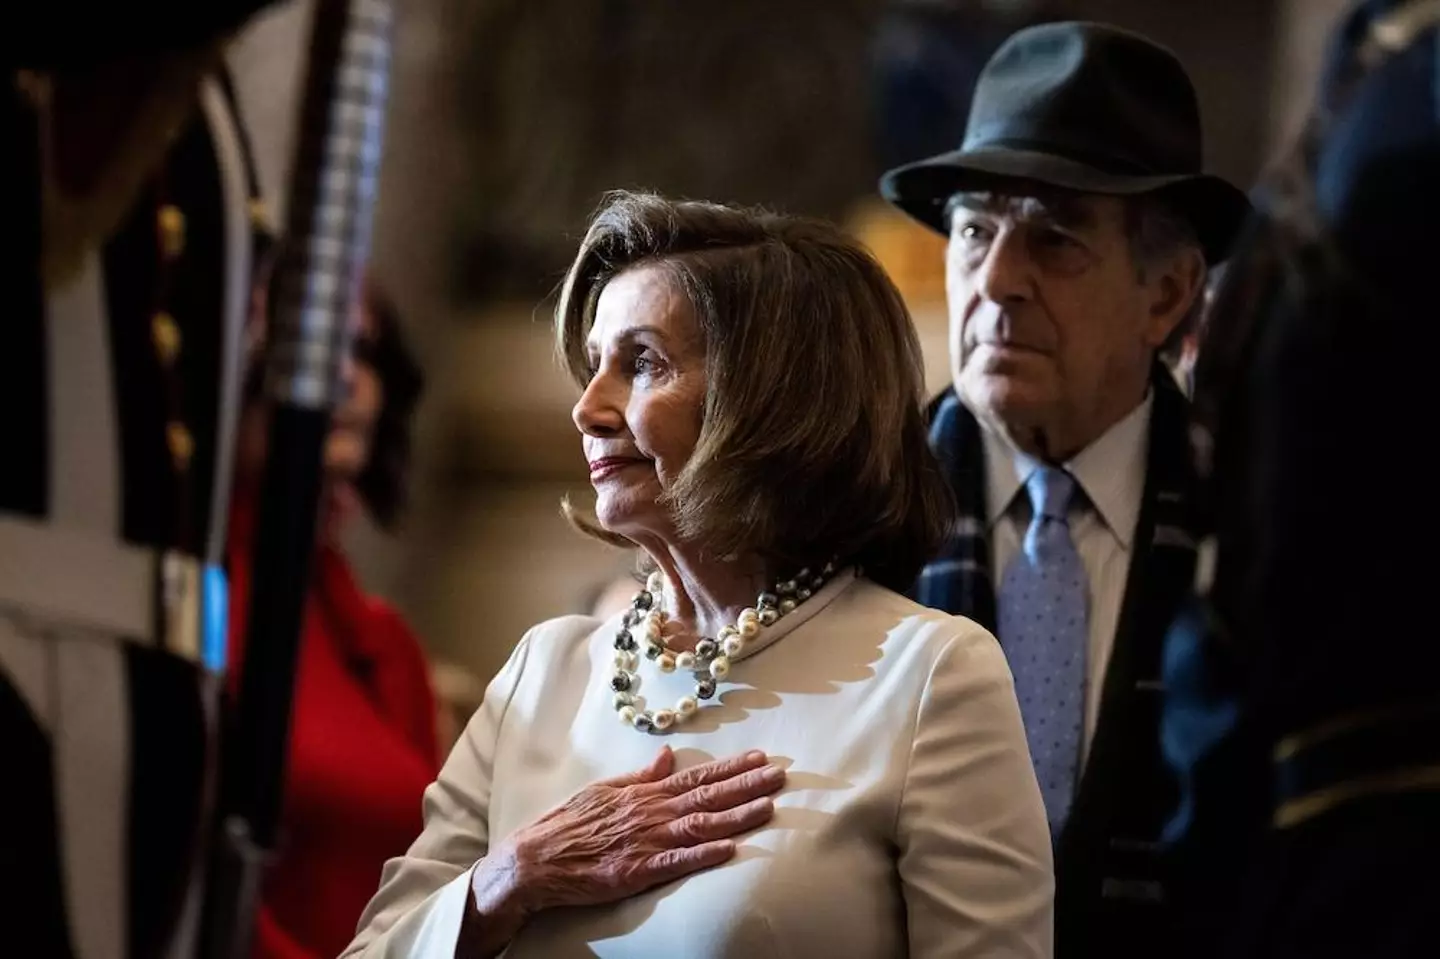 Nancy Pelosi says her husband is on the mend but that it will take 'more time'.